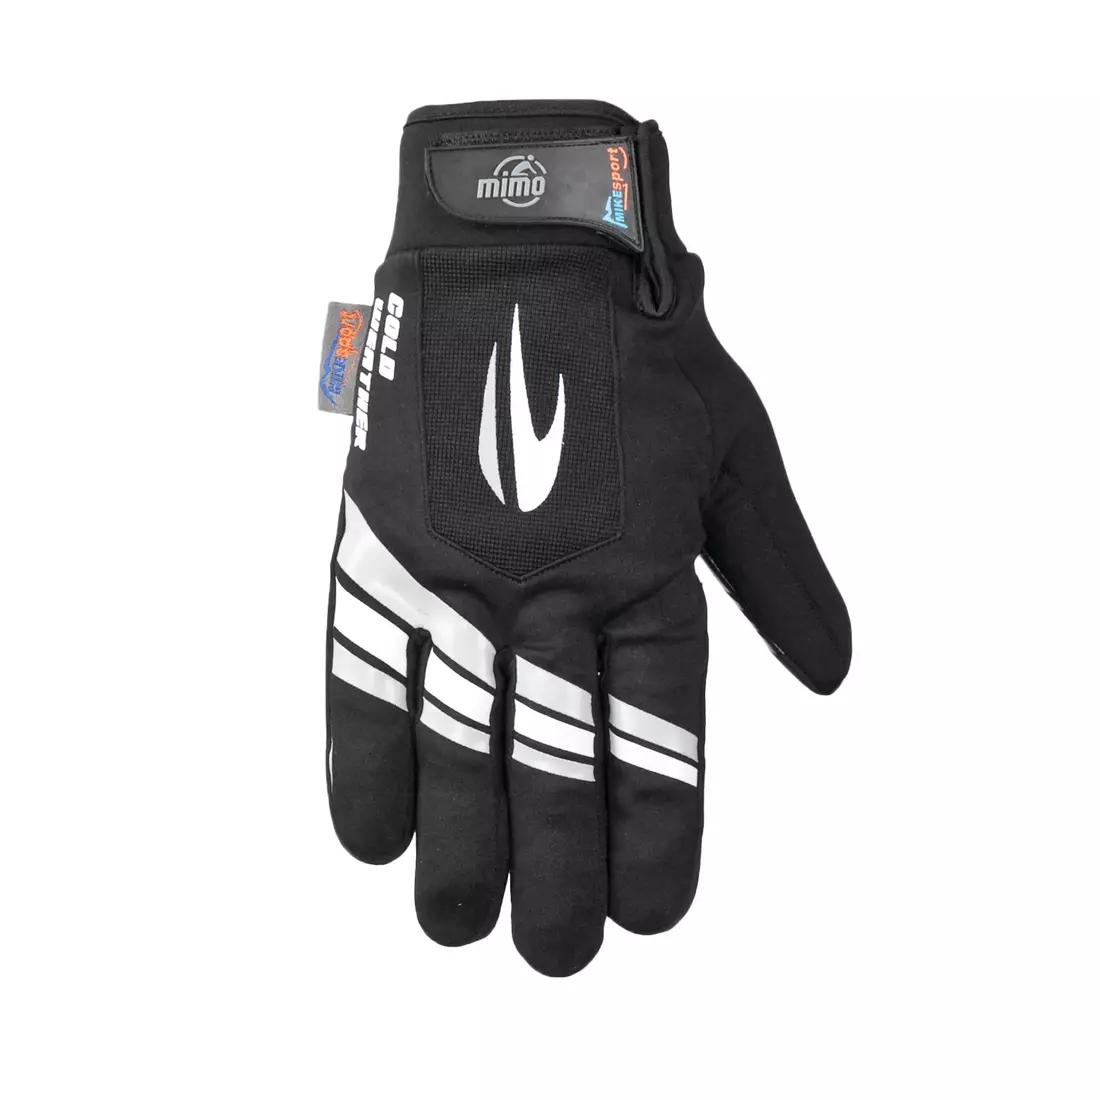 MikeSPORT 2014-W 1902 winter cycling gloves, color: black